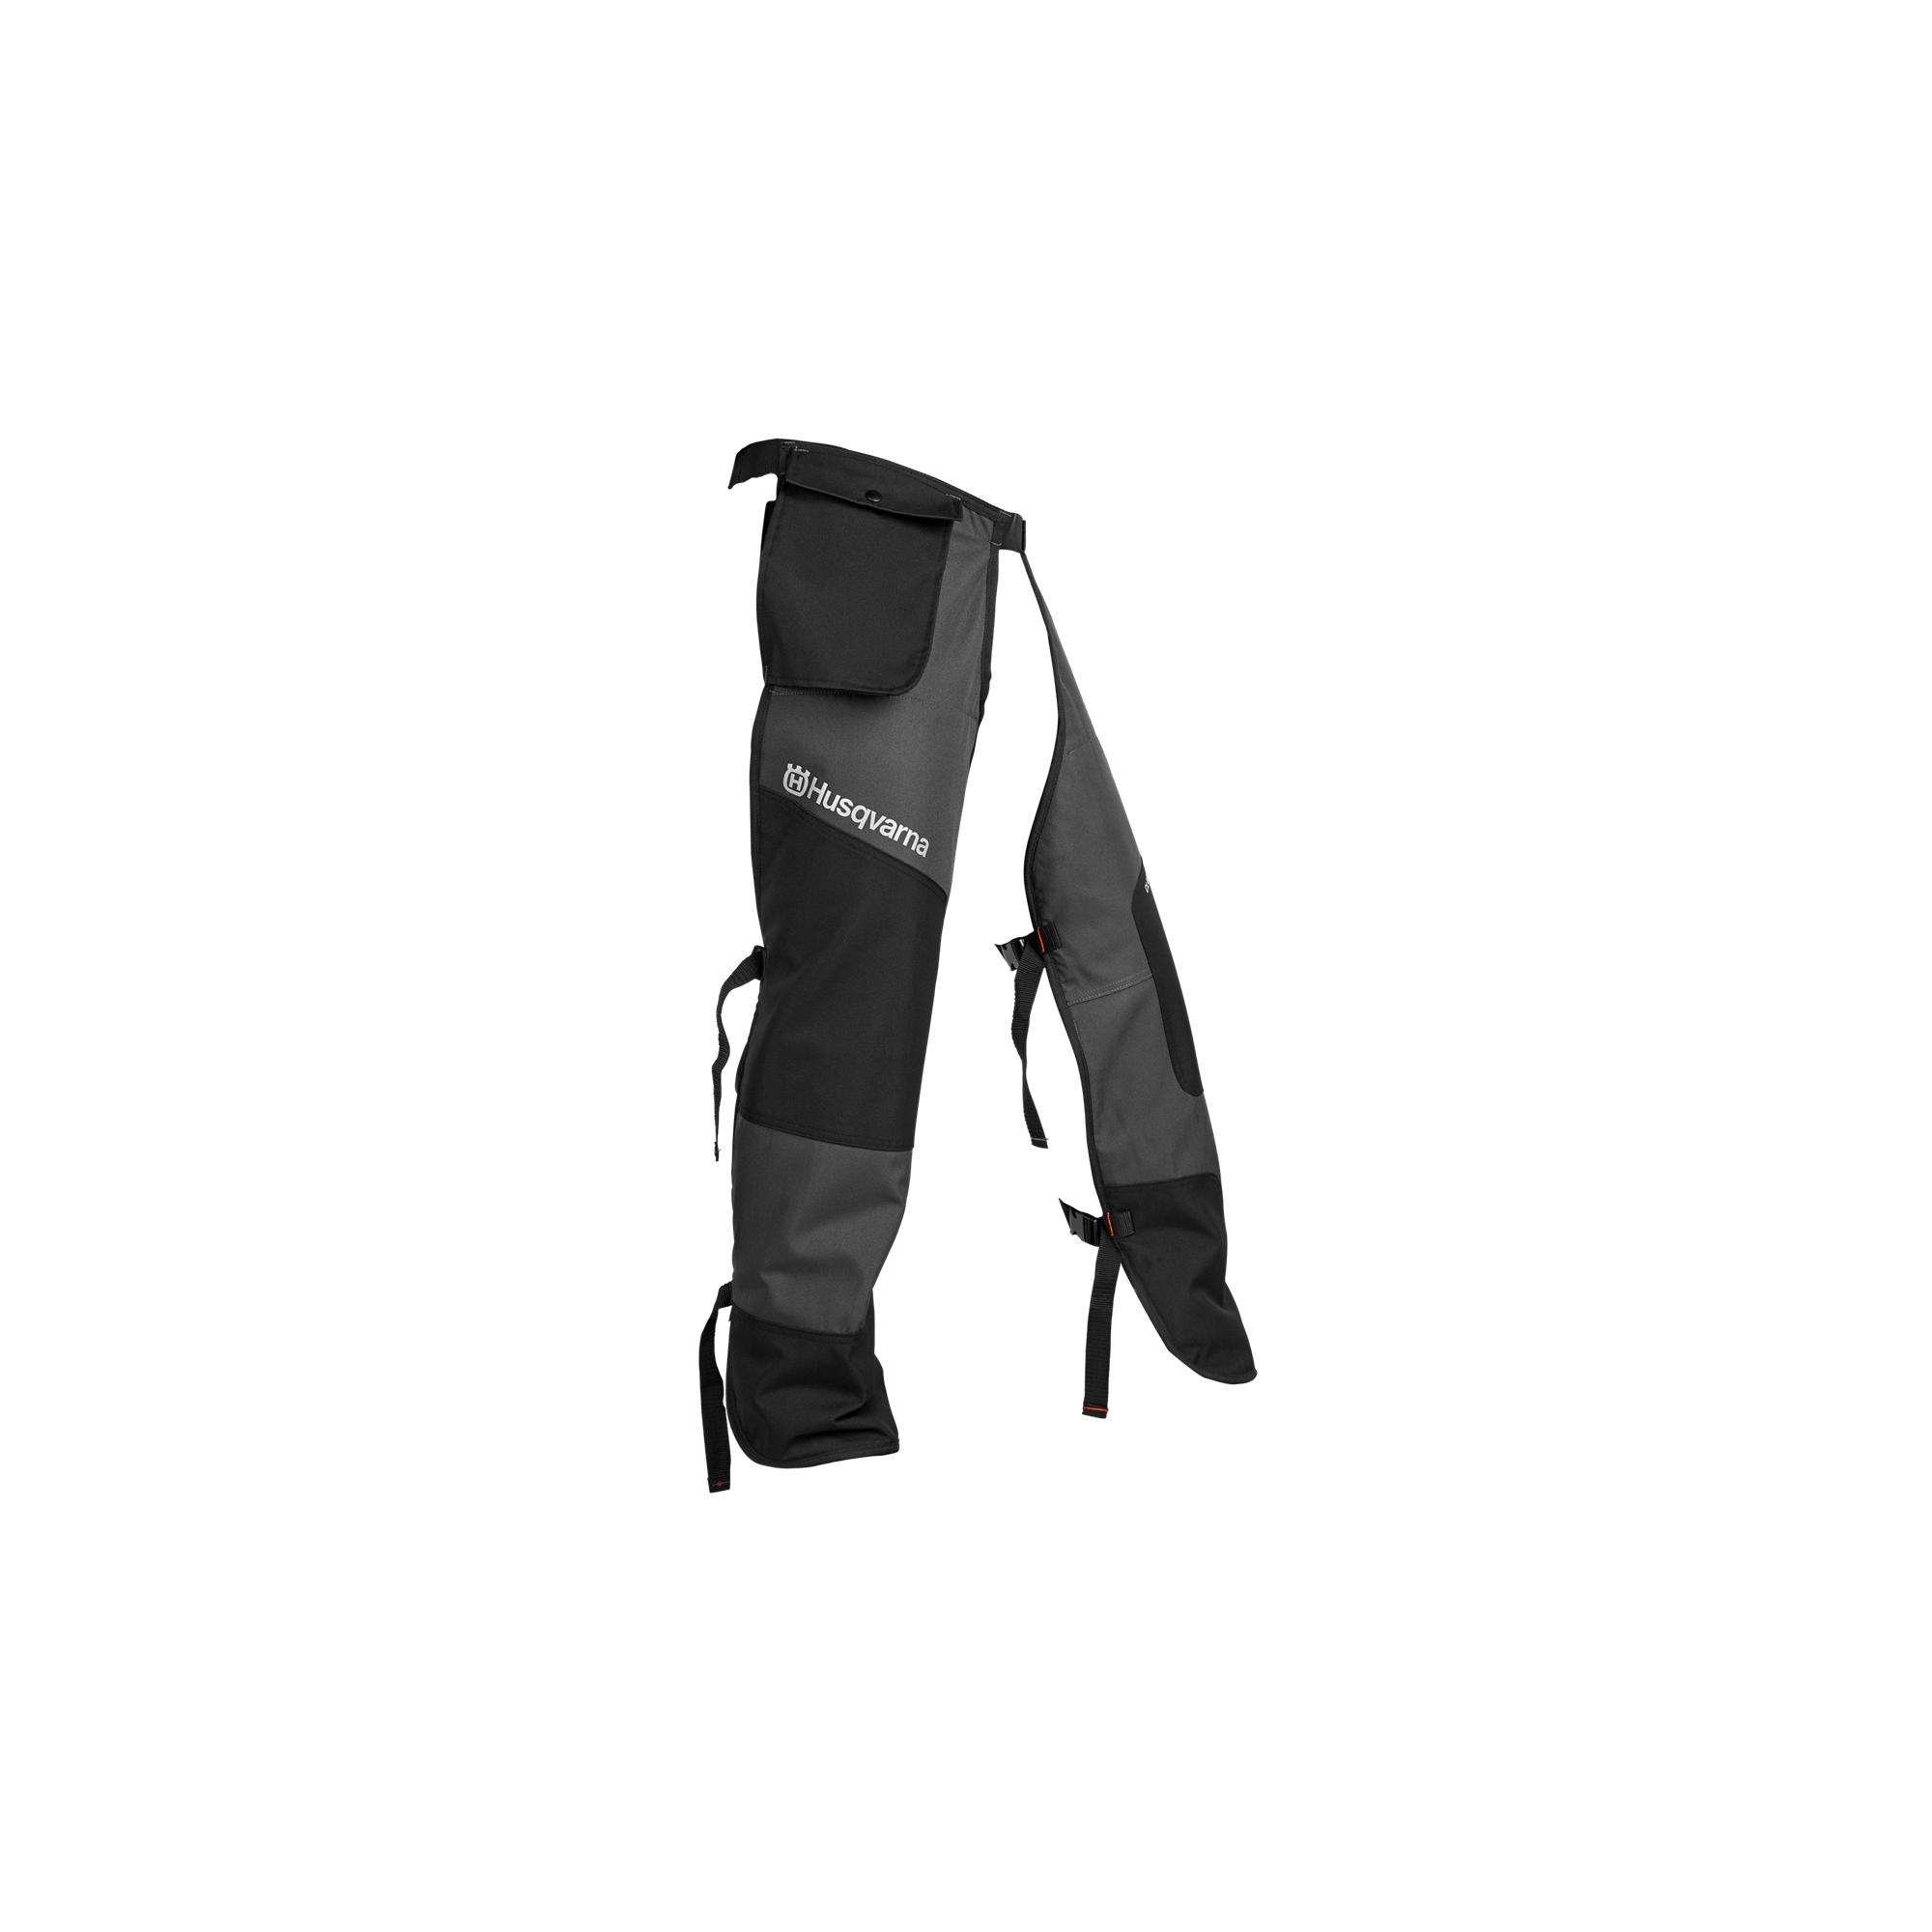 Image for Classic Chainsaw Chaps                                                                                                           from HusqvarnaB2C